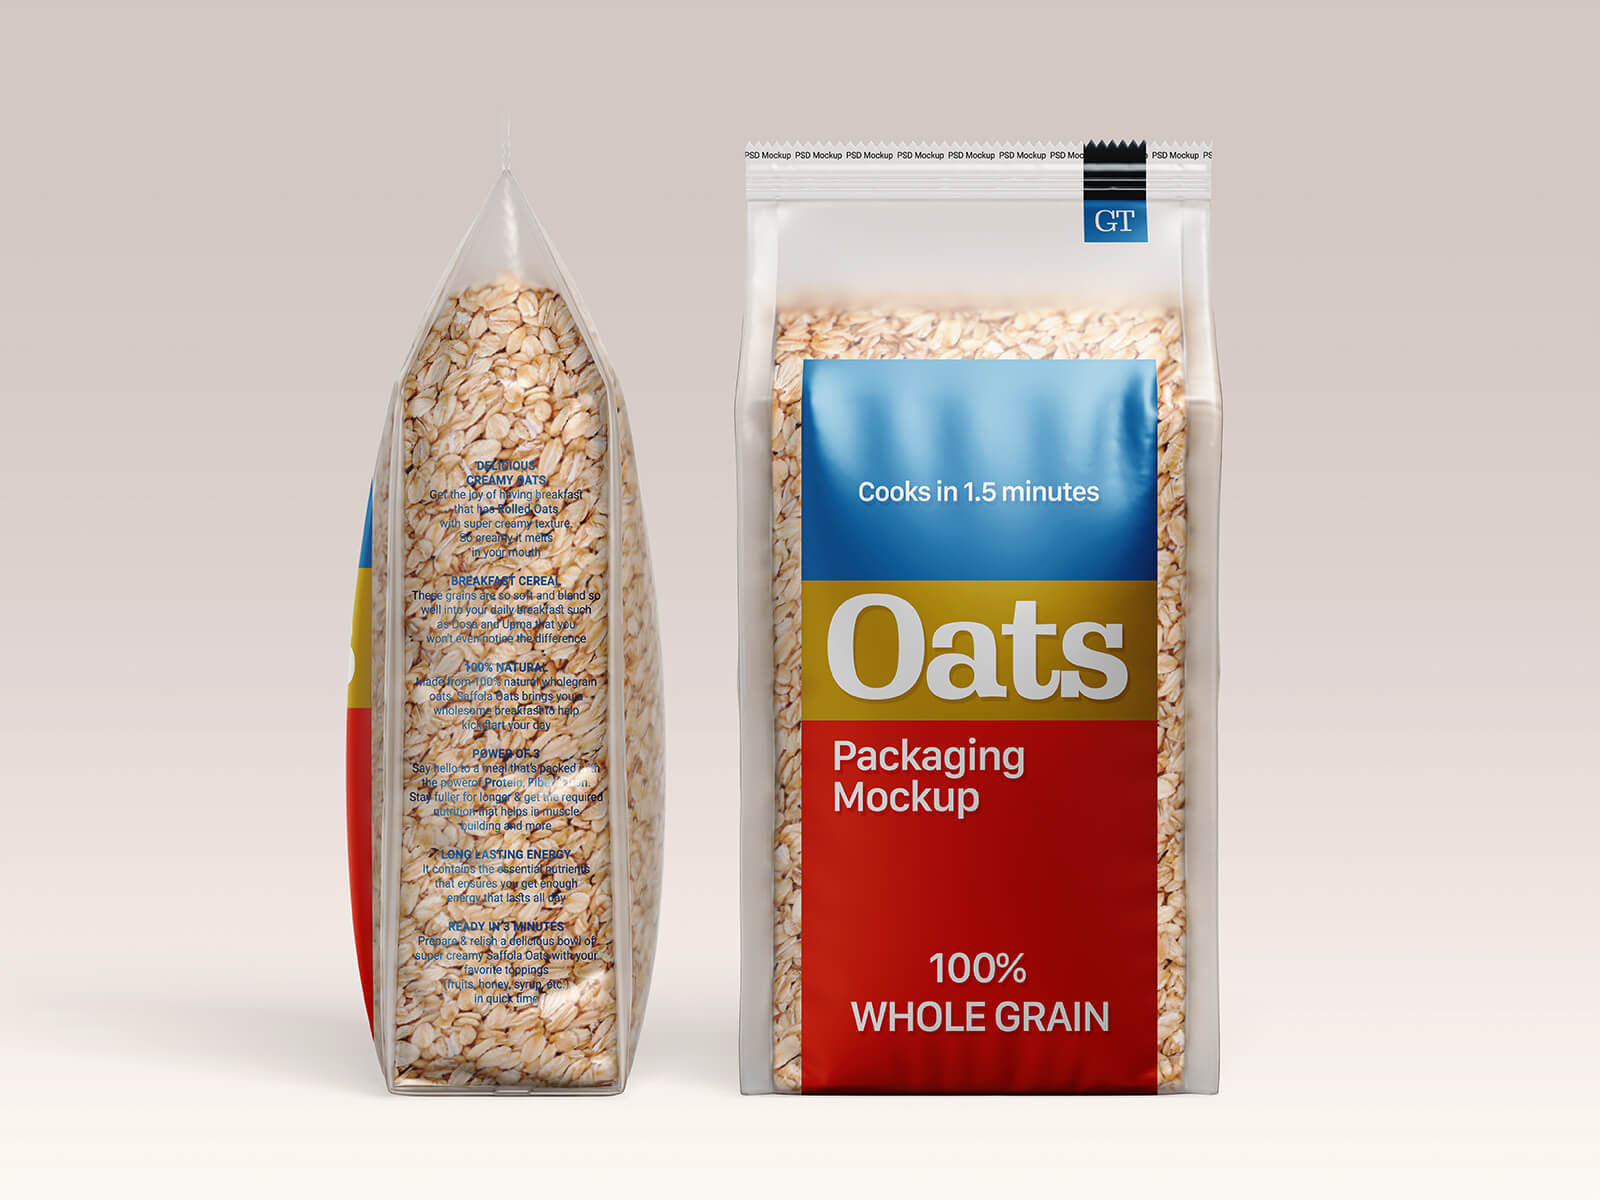 Free Oats Stand-Up Pouch Packaging Mockup PSD Set